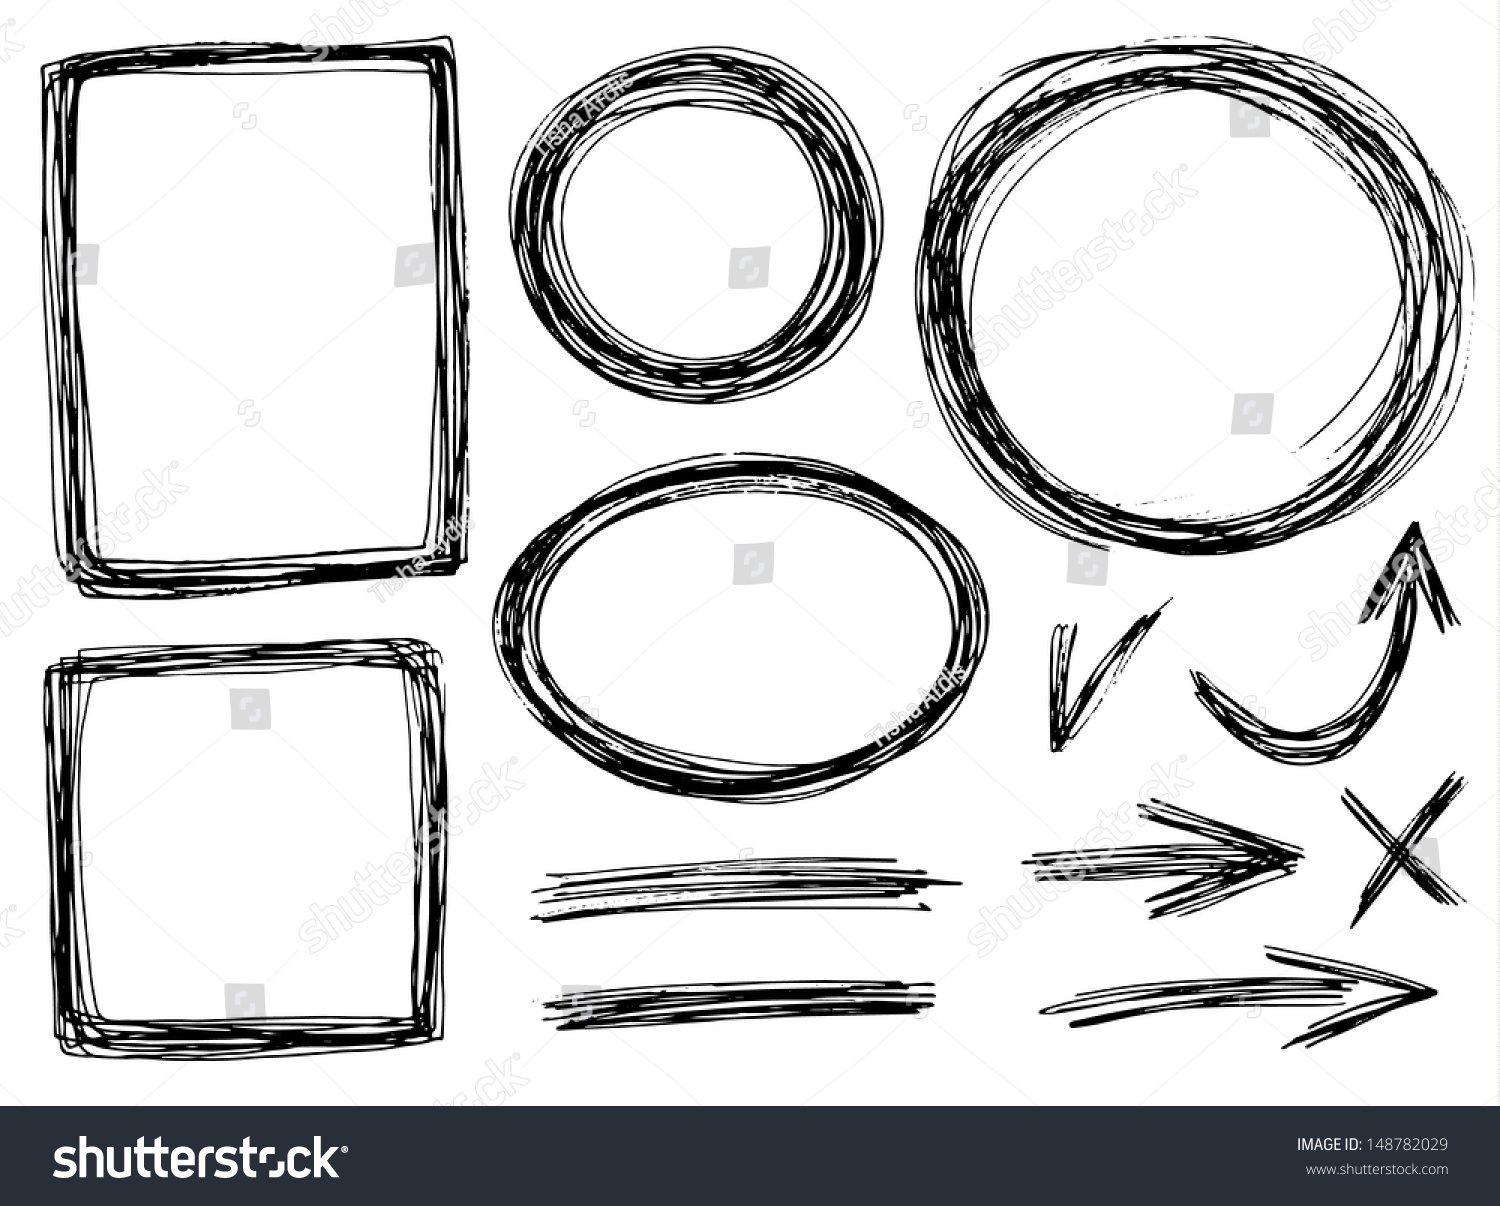 Vector Hand-Draw Frames With Pencil Texture - 148782029 